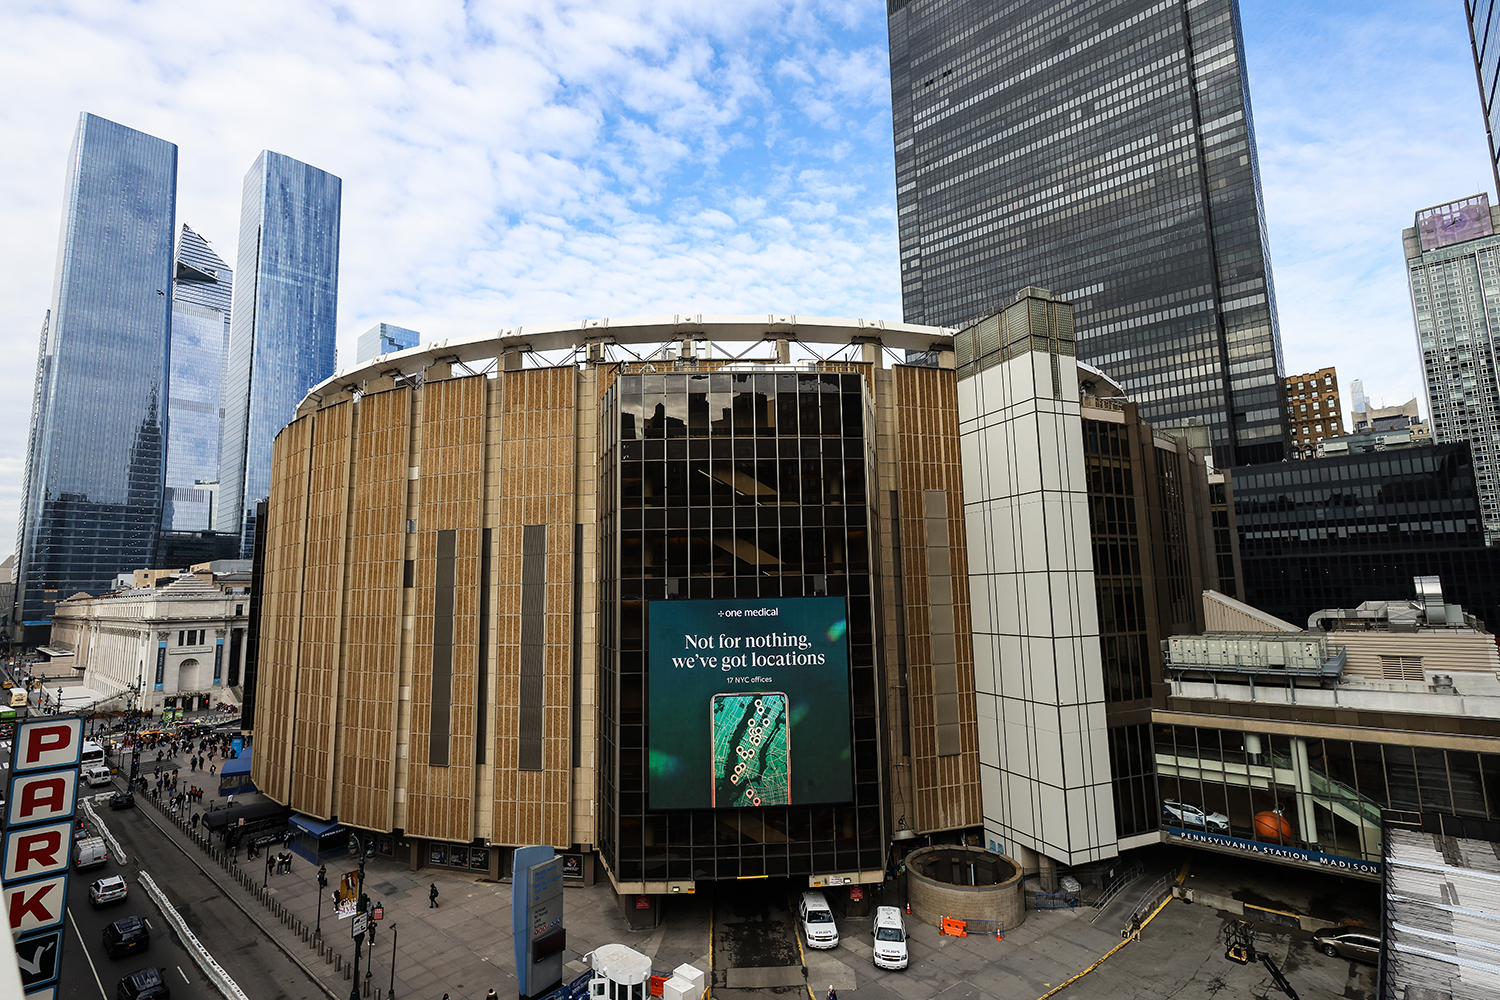 New York Planning Commission Votes To Keep Madison Square Garden